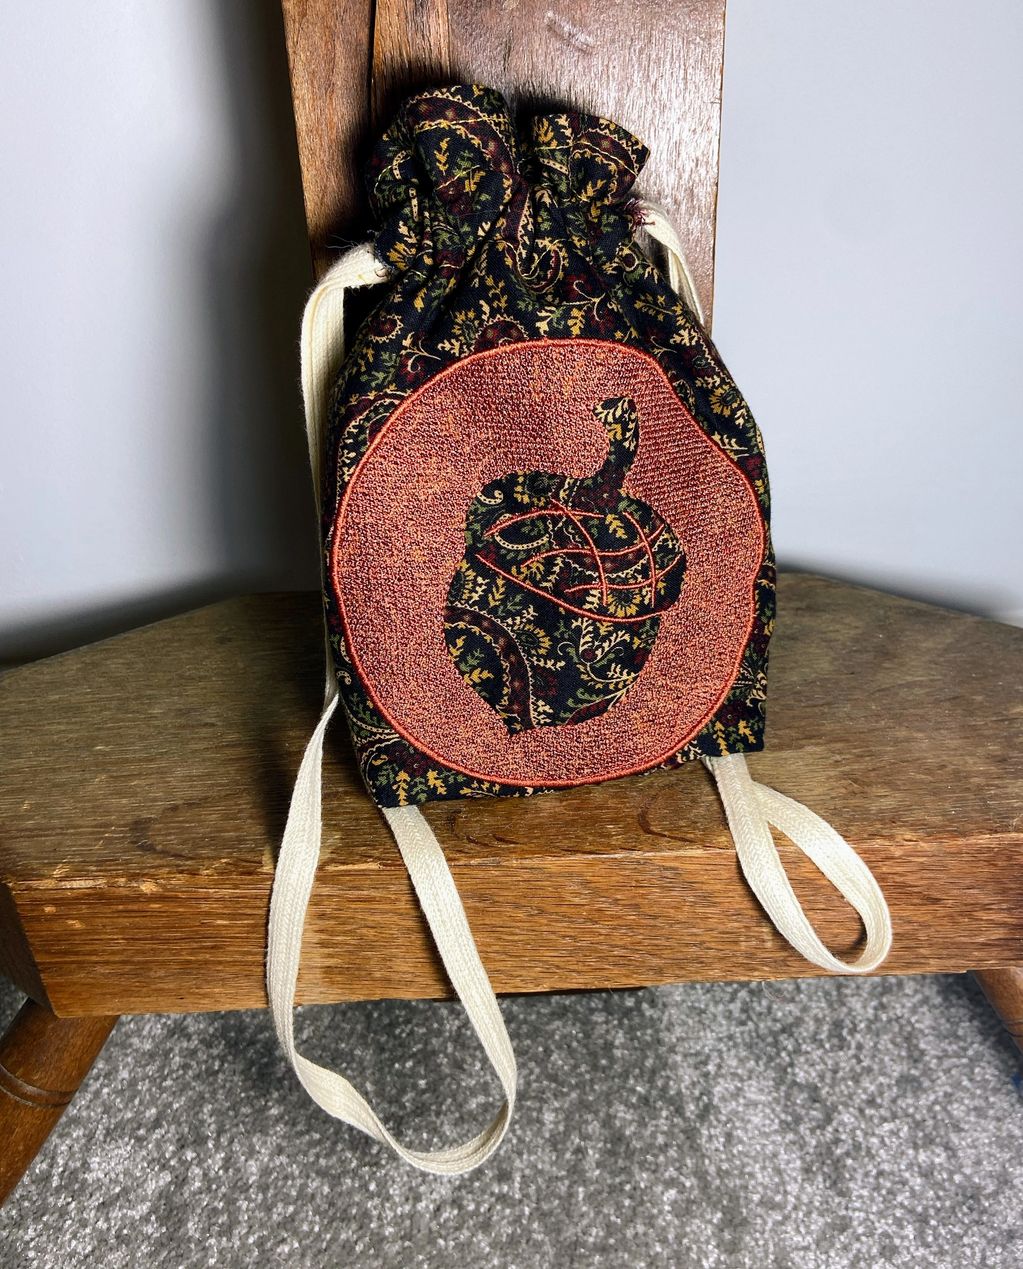 The Acorn Intention Bag